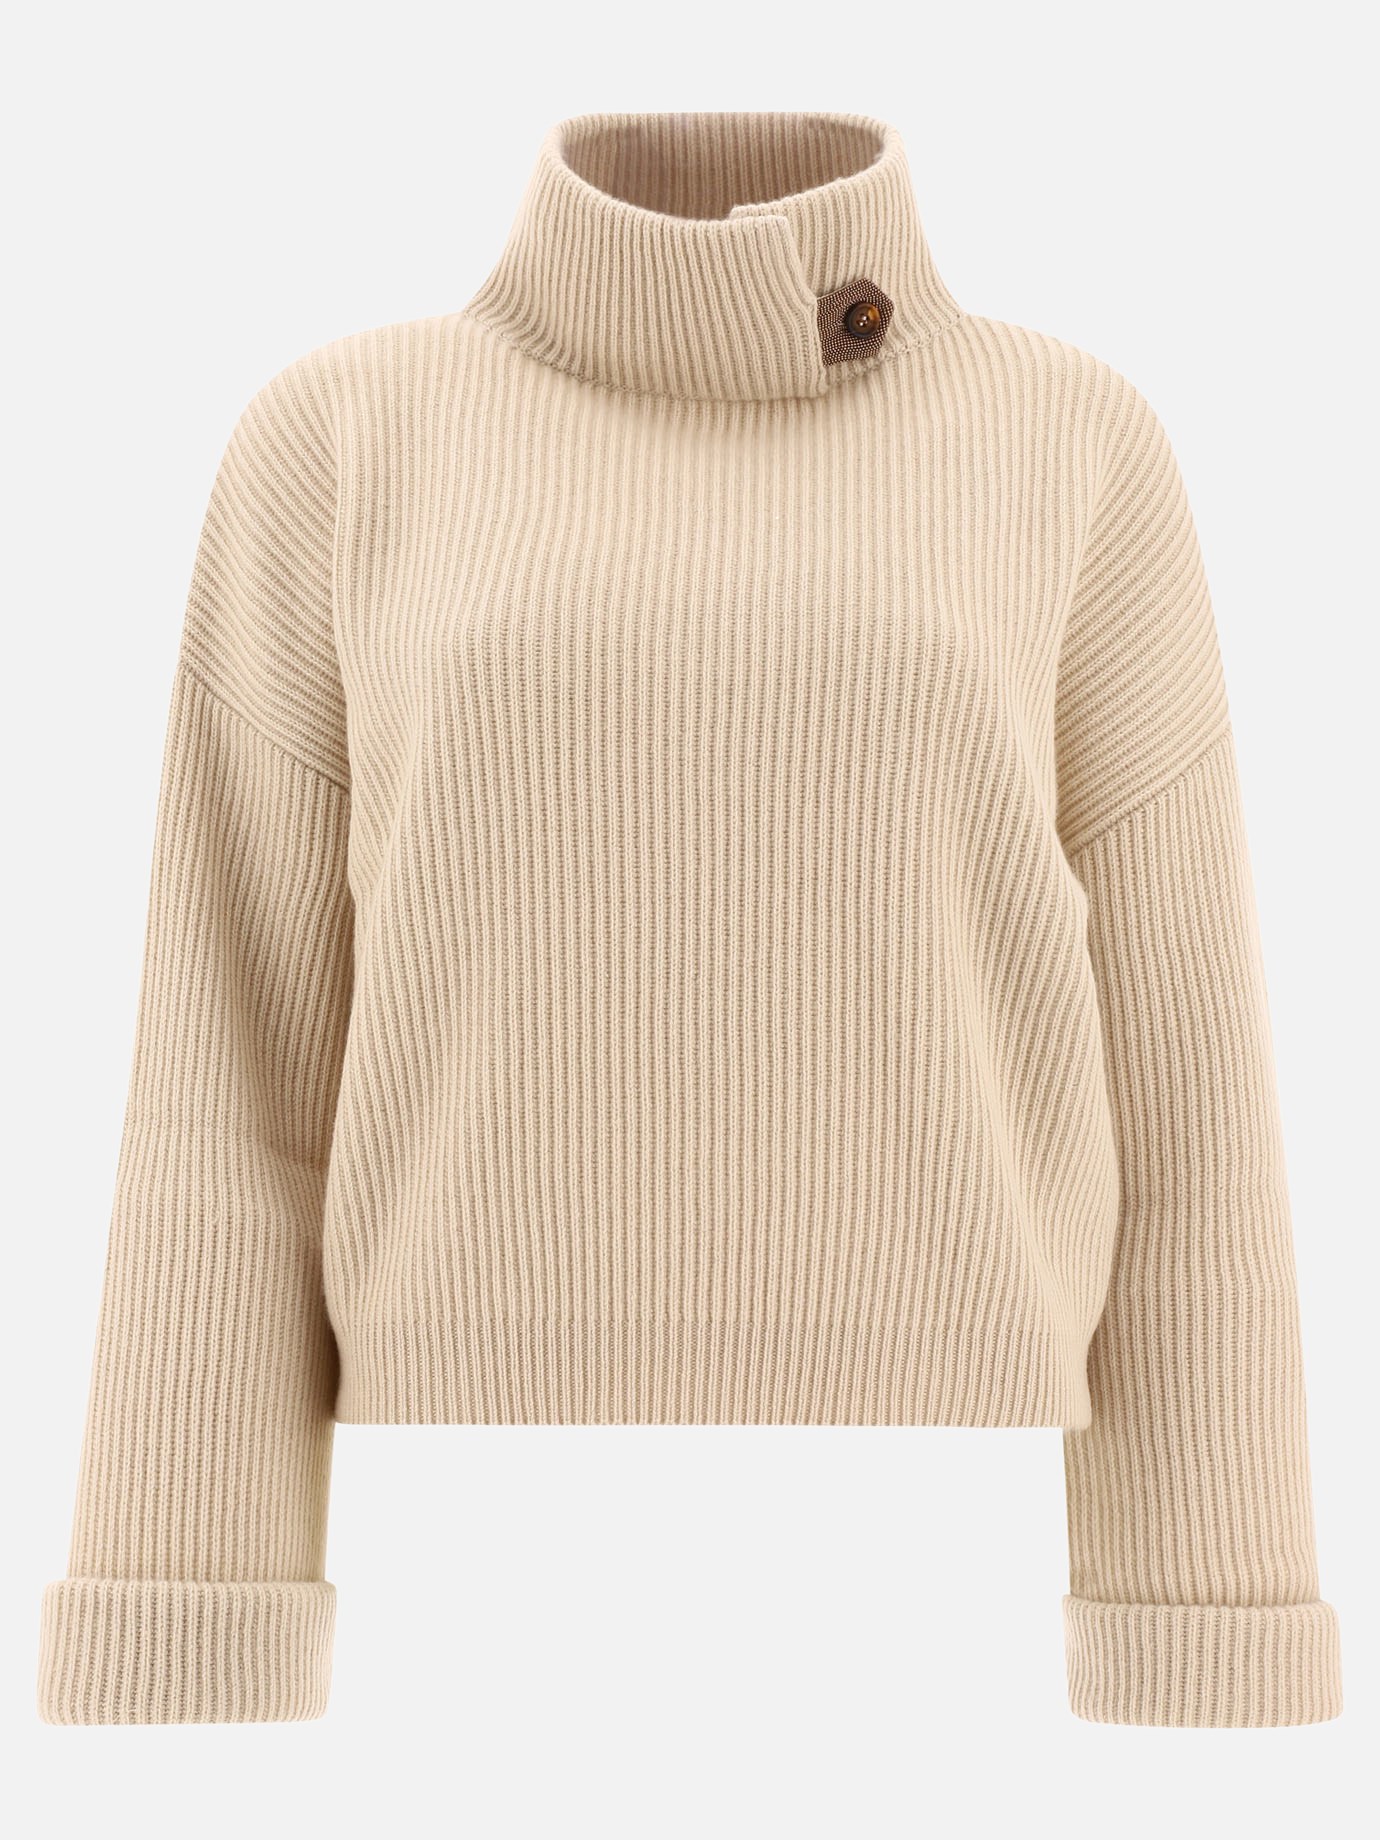 Ribbed sweater with neck detail